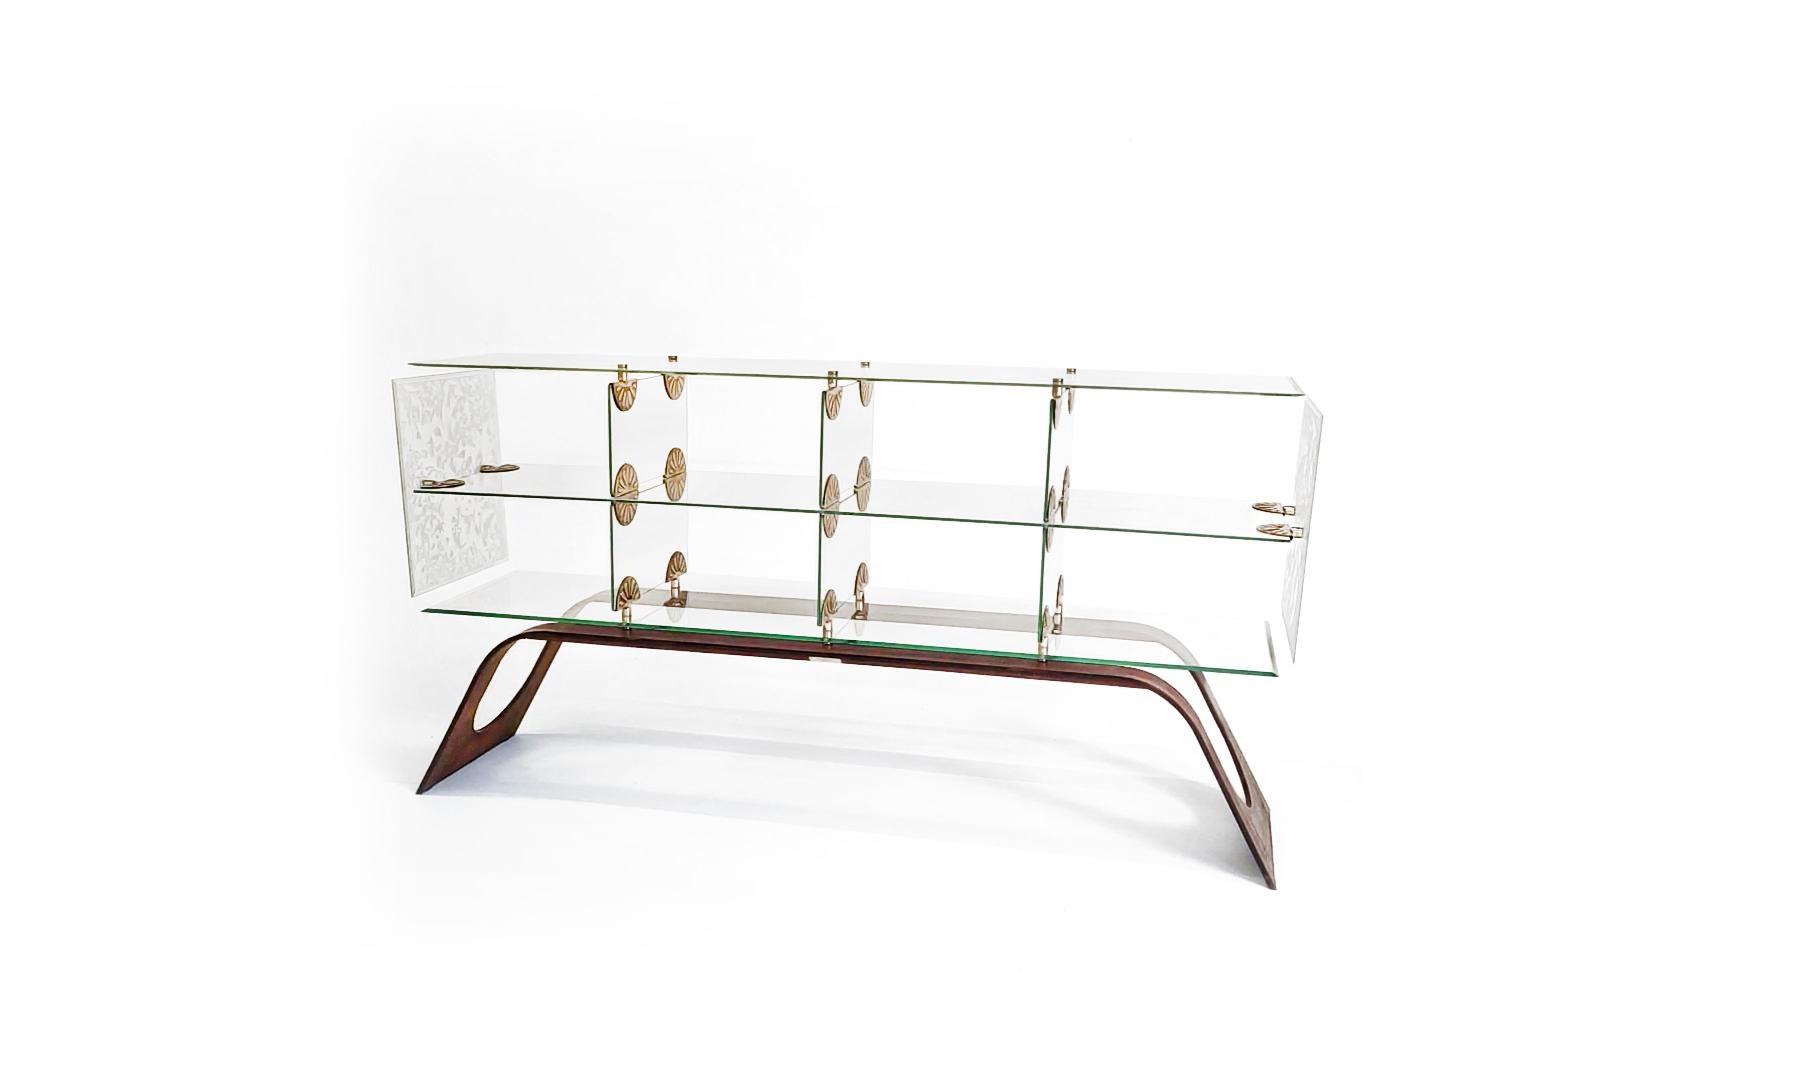 Sauvegarde is a console made of glass, brass, and oxidized steel. It is an artistic piece of furniture that should he handled with
the utmost care. The aesthetics of the furmiture and the delicacy of the brass joints give this work its elegance and